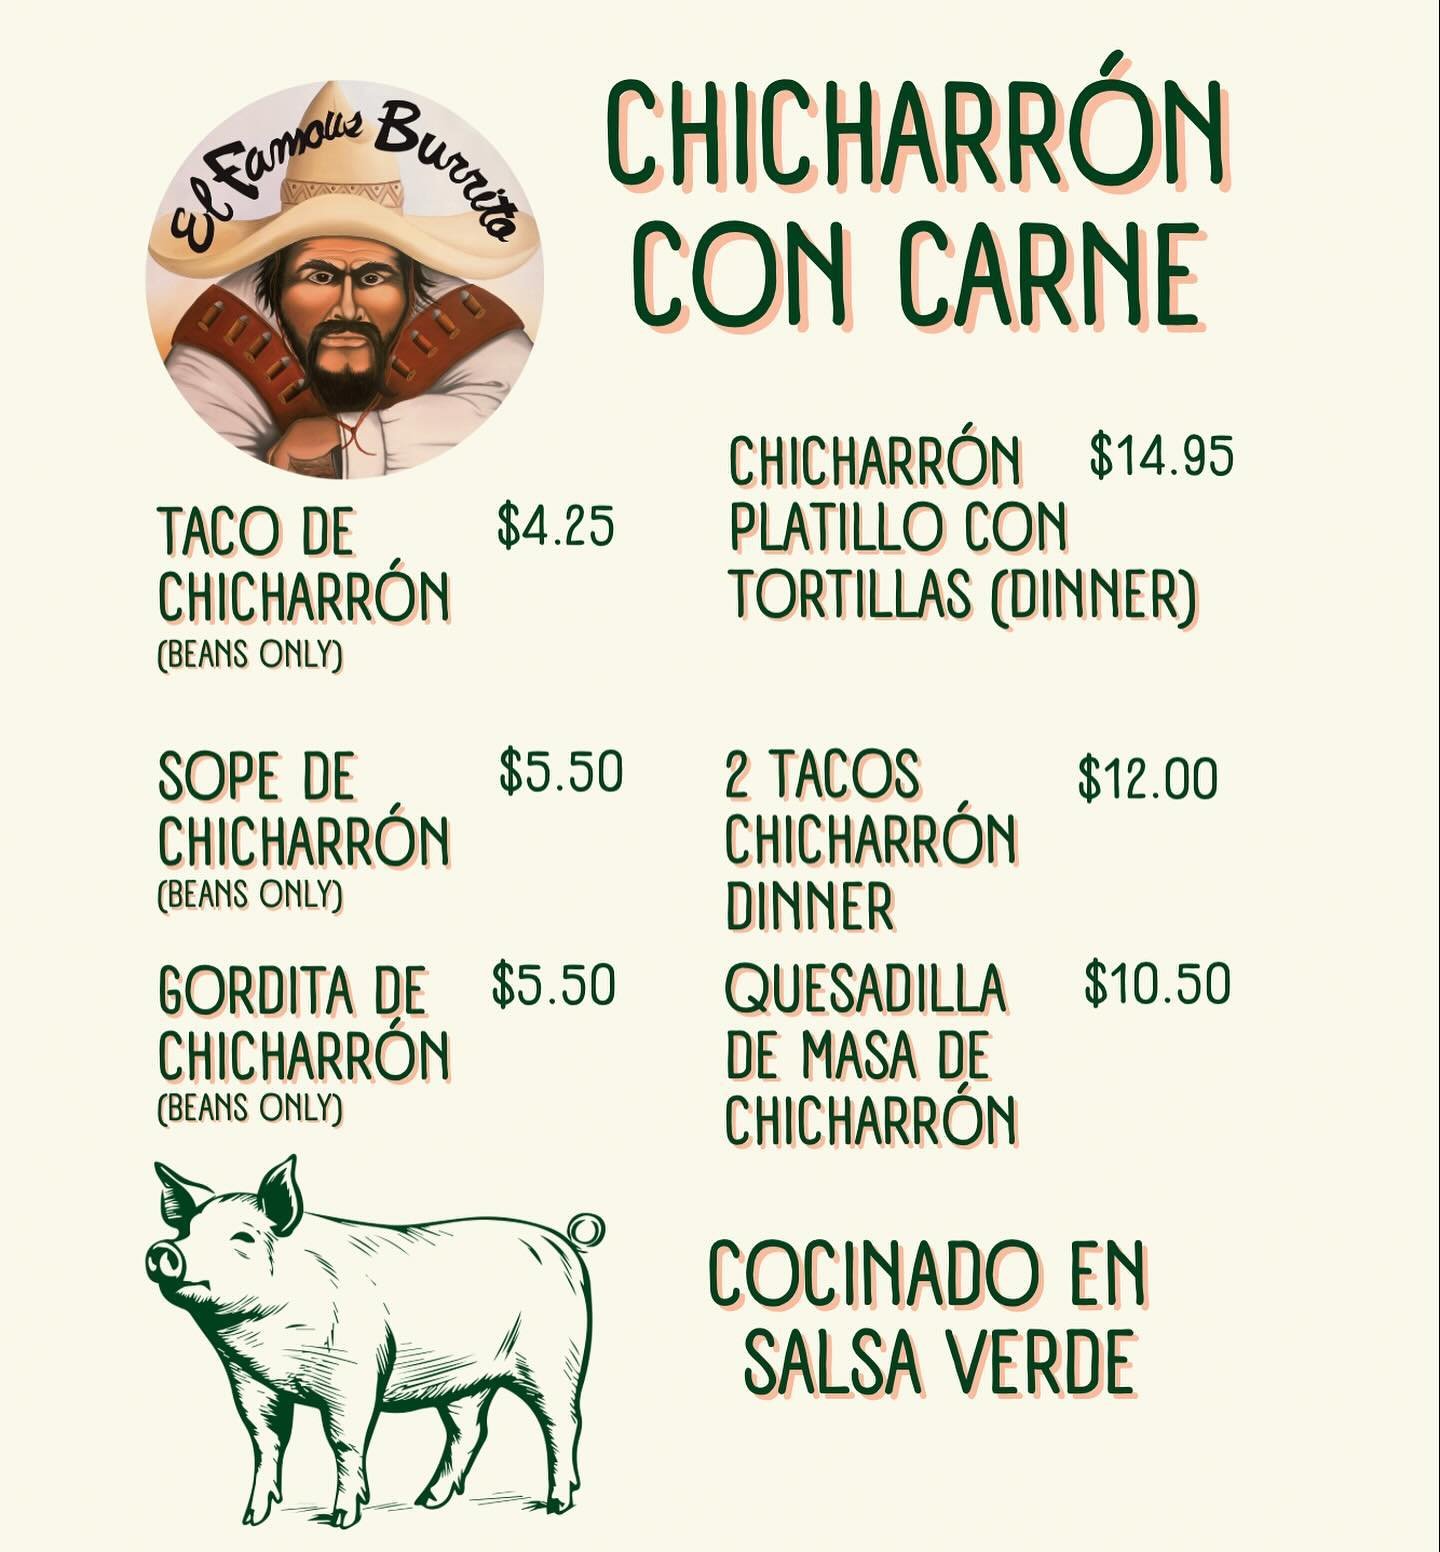 Try our latest dishes with chicharron! Many options for you to choose from and all under $14.95